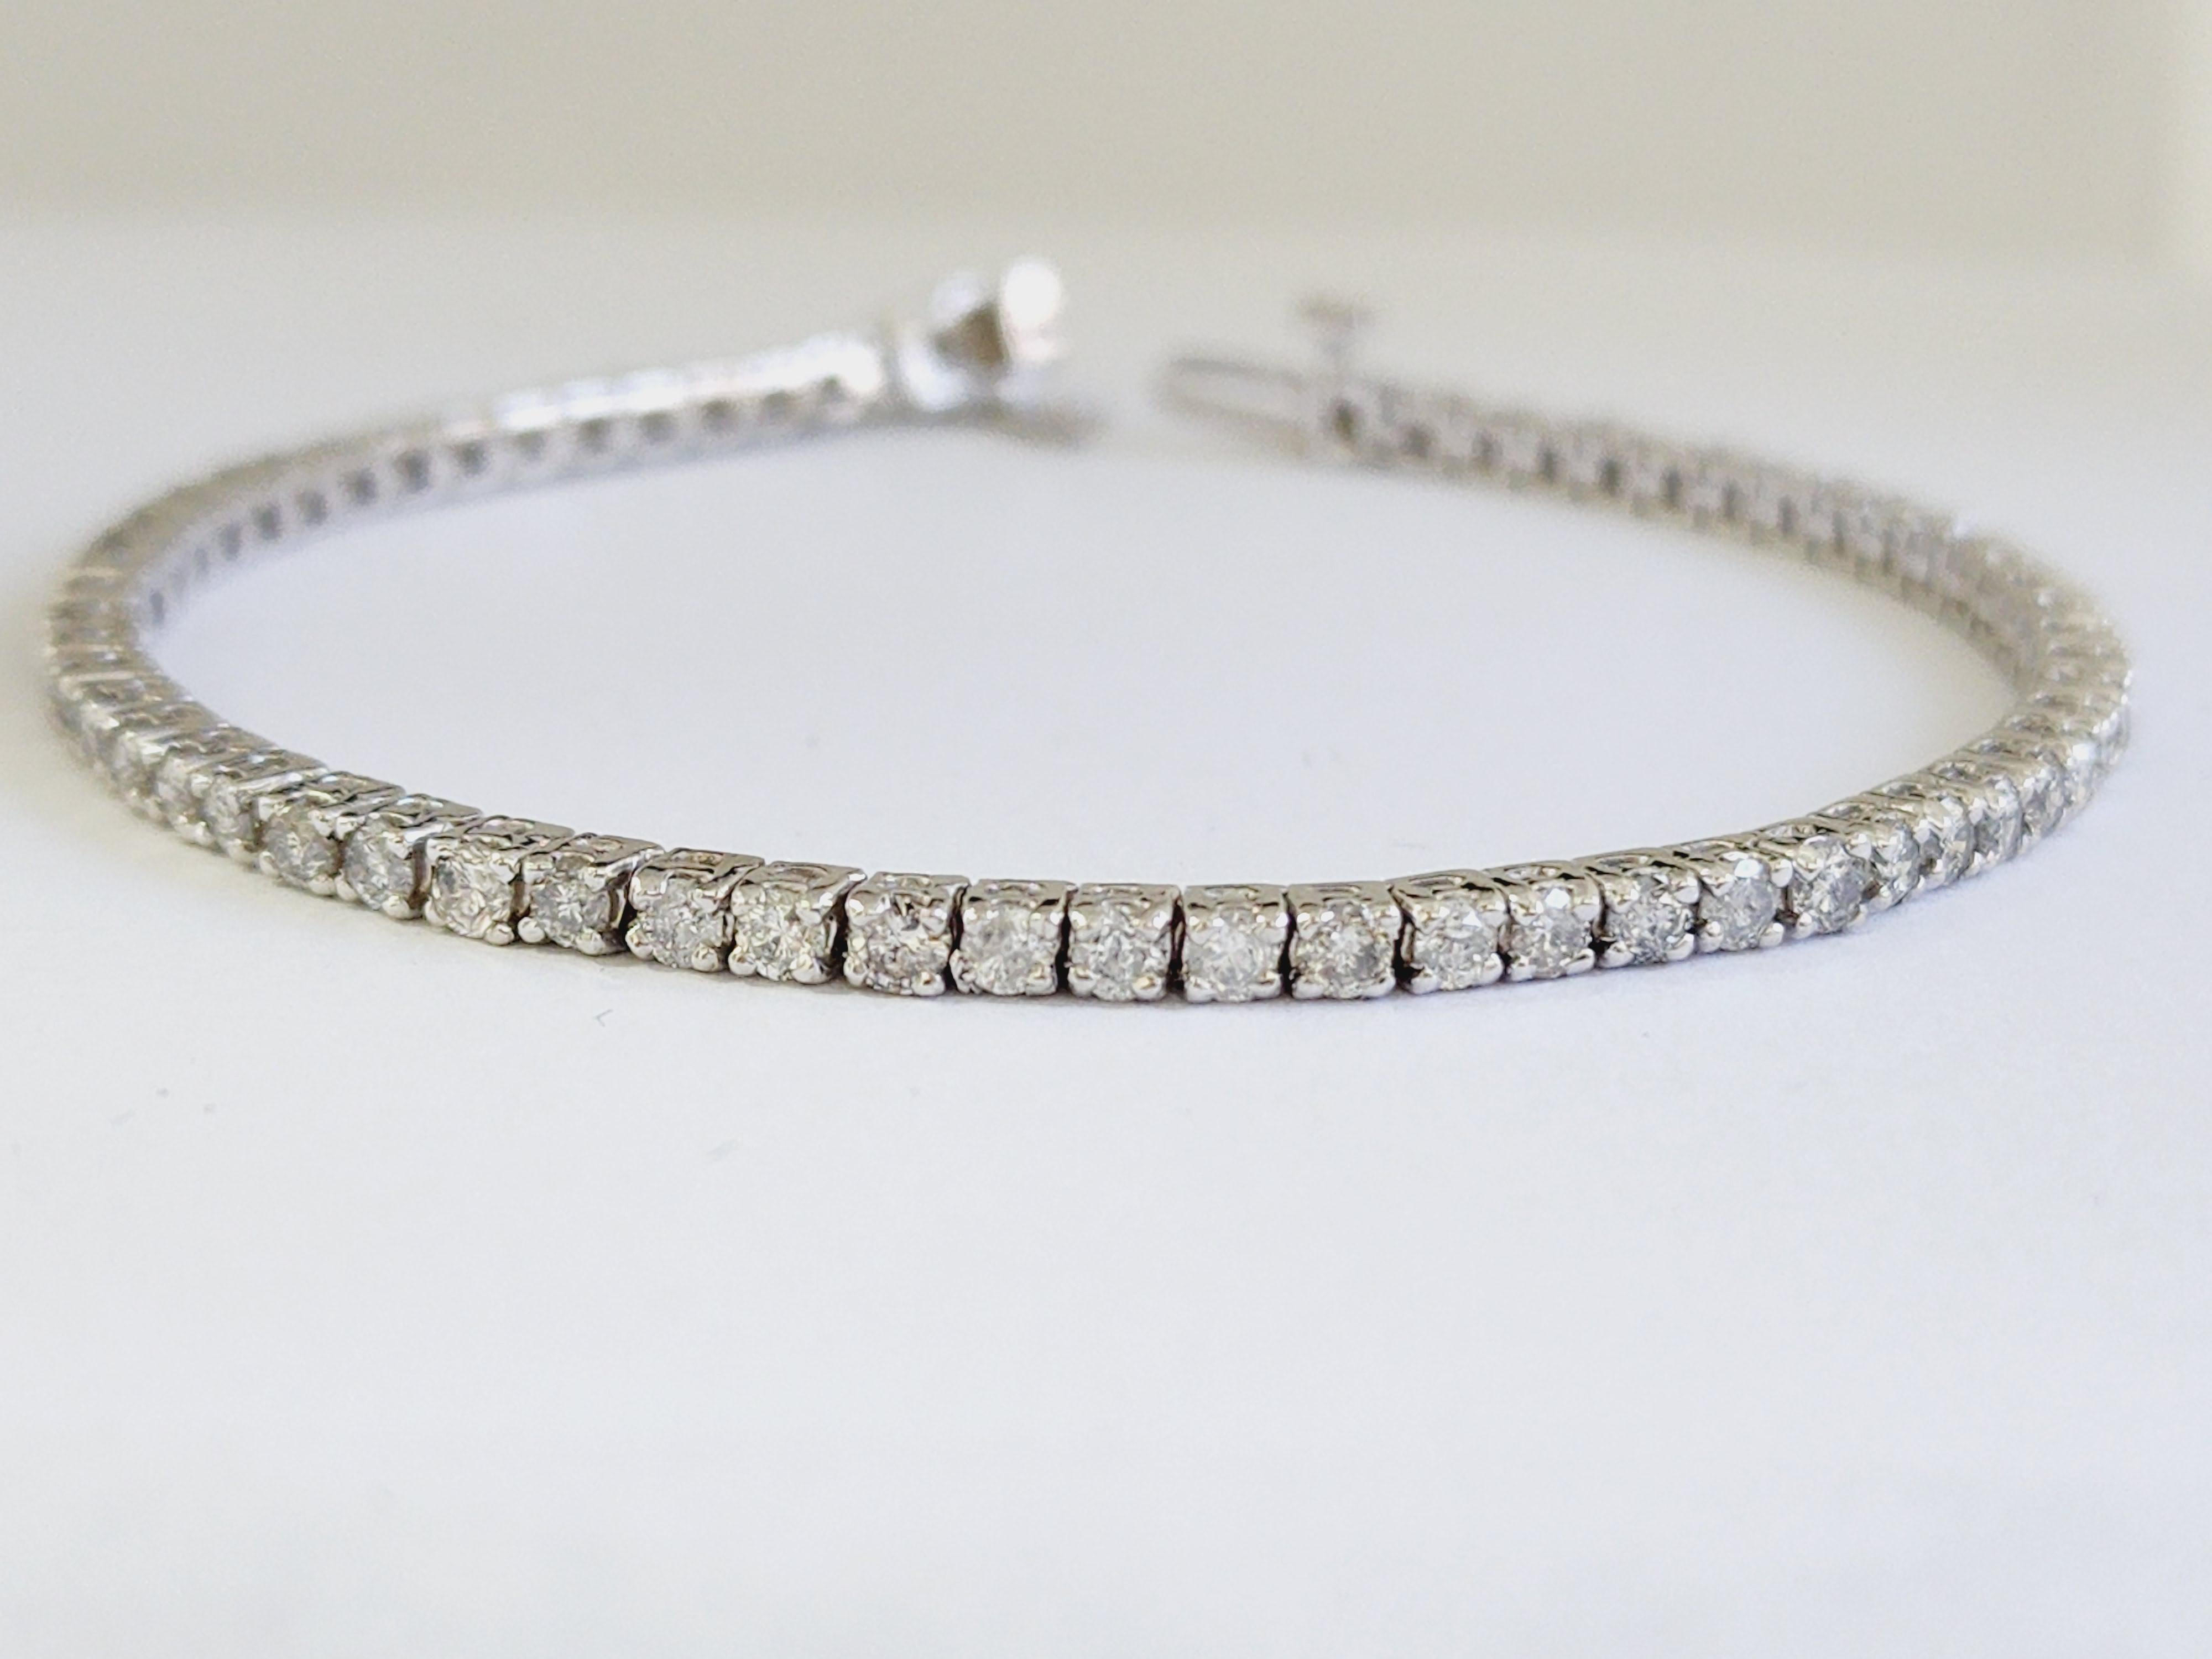 Beautiful diamond tennis bracelet, round-brilliant cut diamonds. set on 14k white gold. each stone is set in a classic four-prong style for maximum light brilliance. Every day style. Extraordinary elegance. 7 inch length. Average Color H-I , Clarity